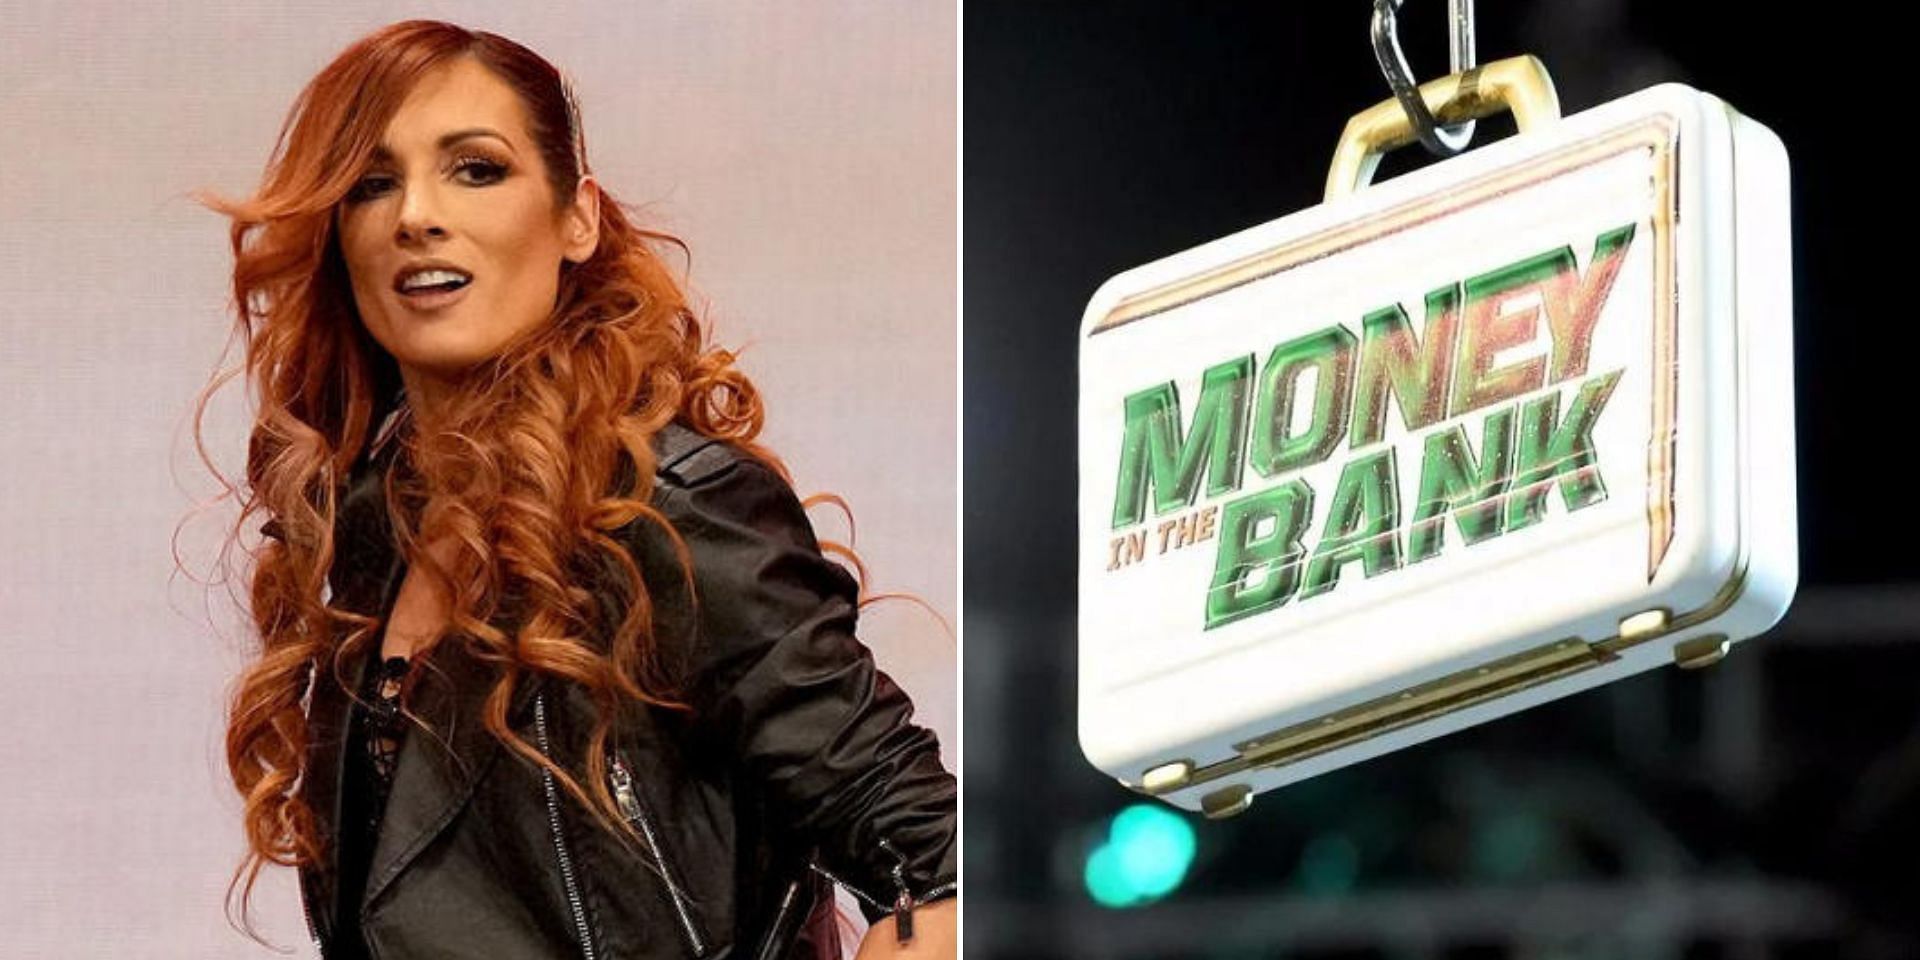 Could Becky Lynch win the Money in the Bank?